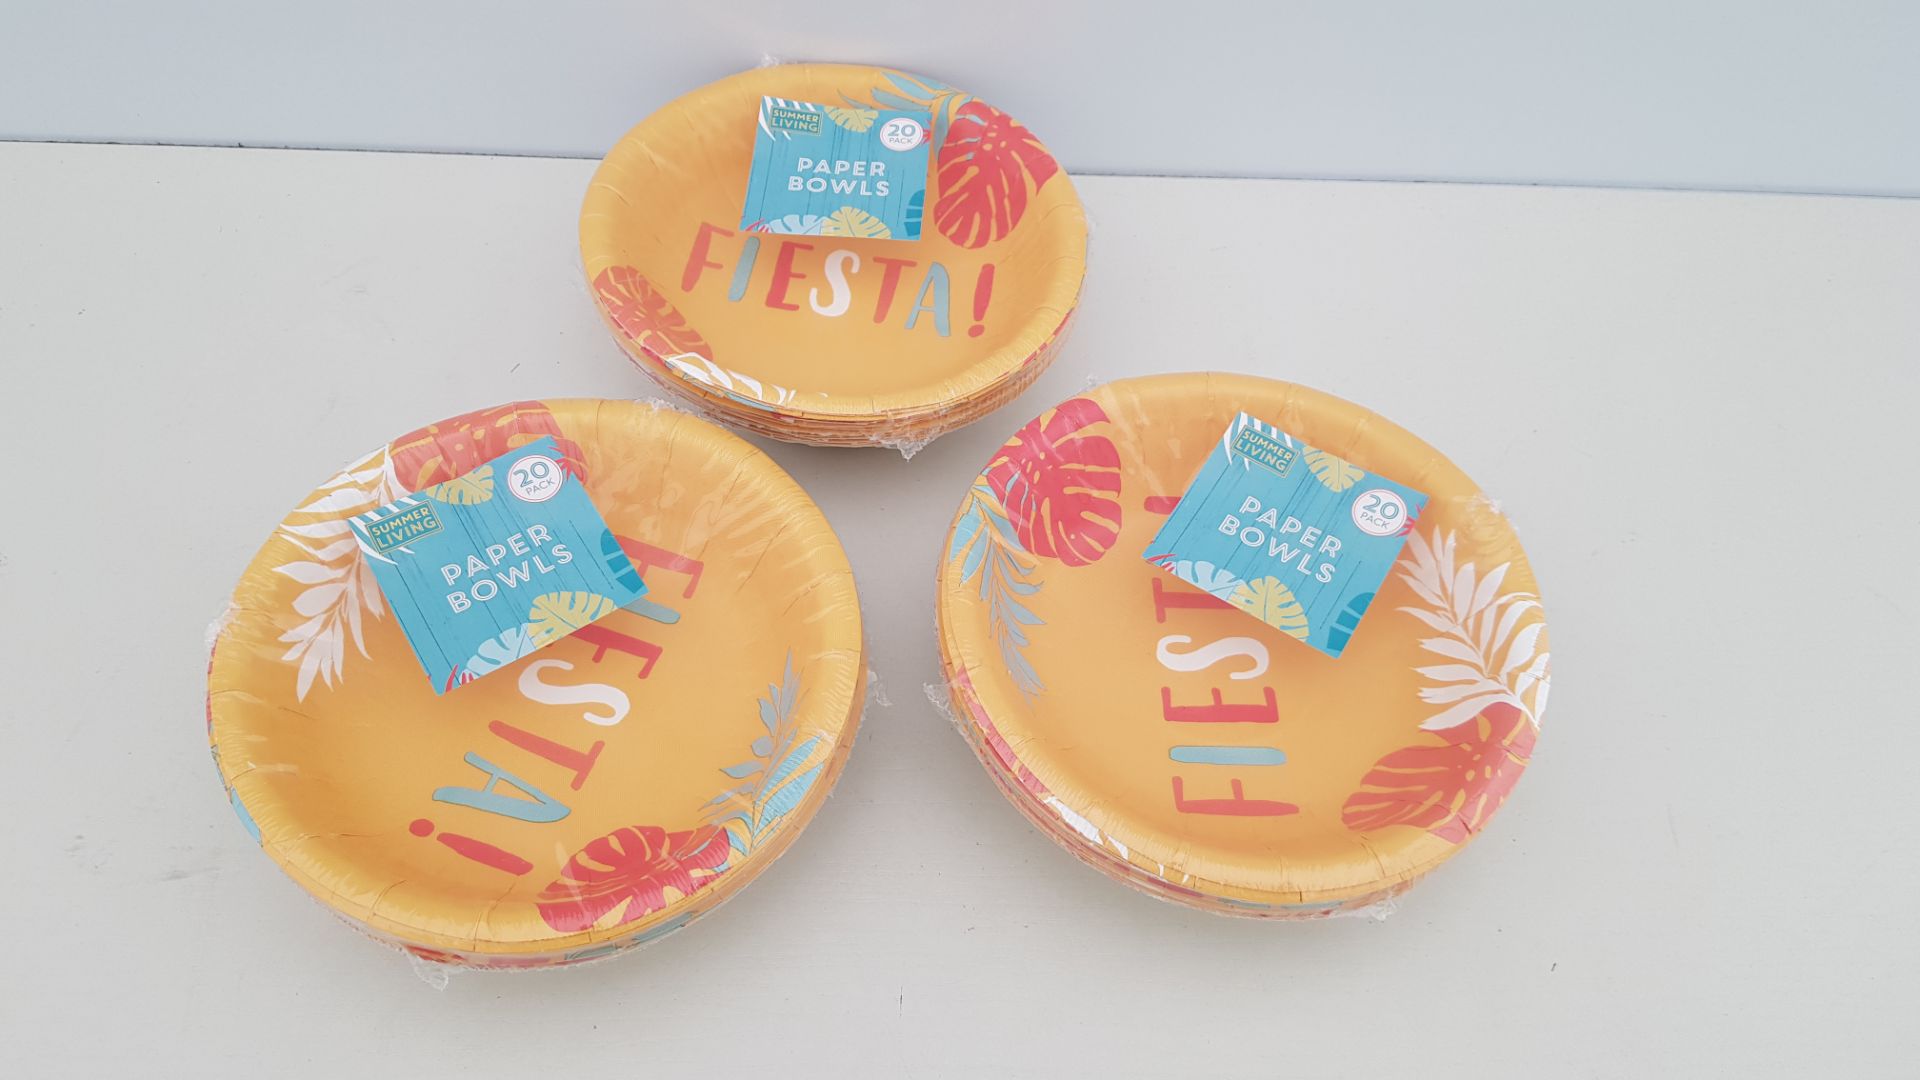 560 X BRAND NEW PACKS OF 20 SUMMER LIVING PAPER BOWLS (STYLE FIESTA) - IN 28 BOXES